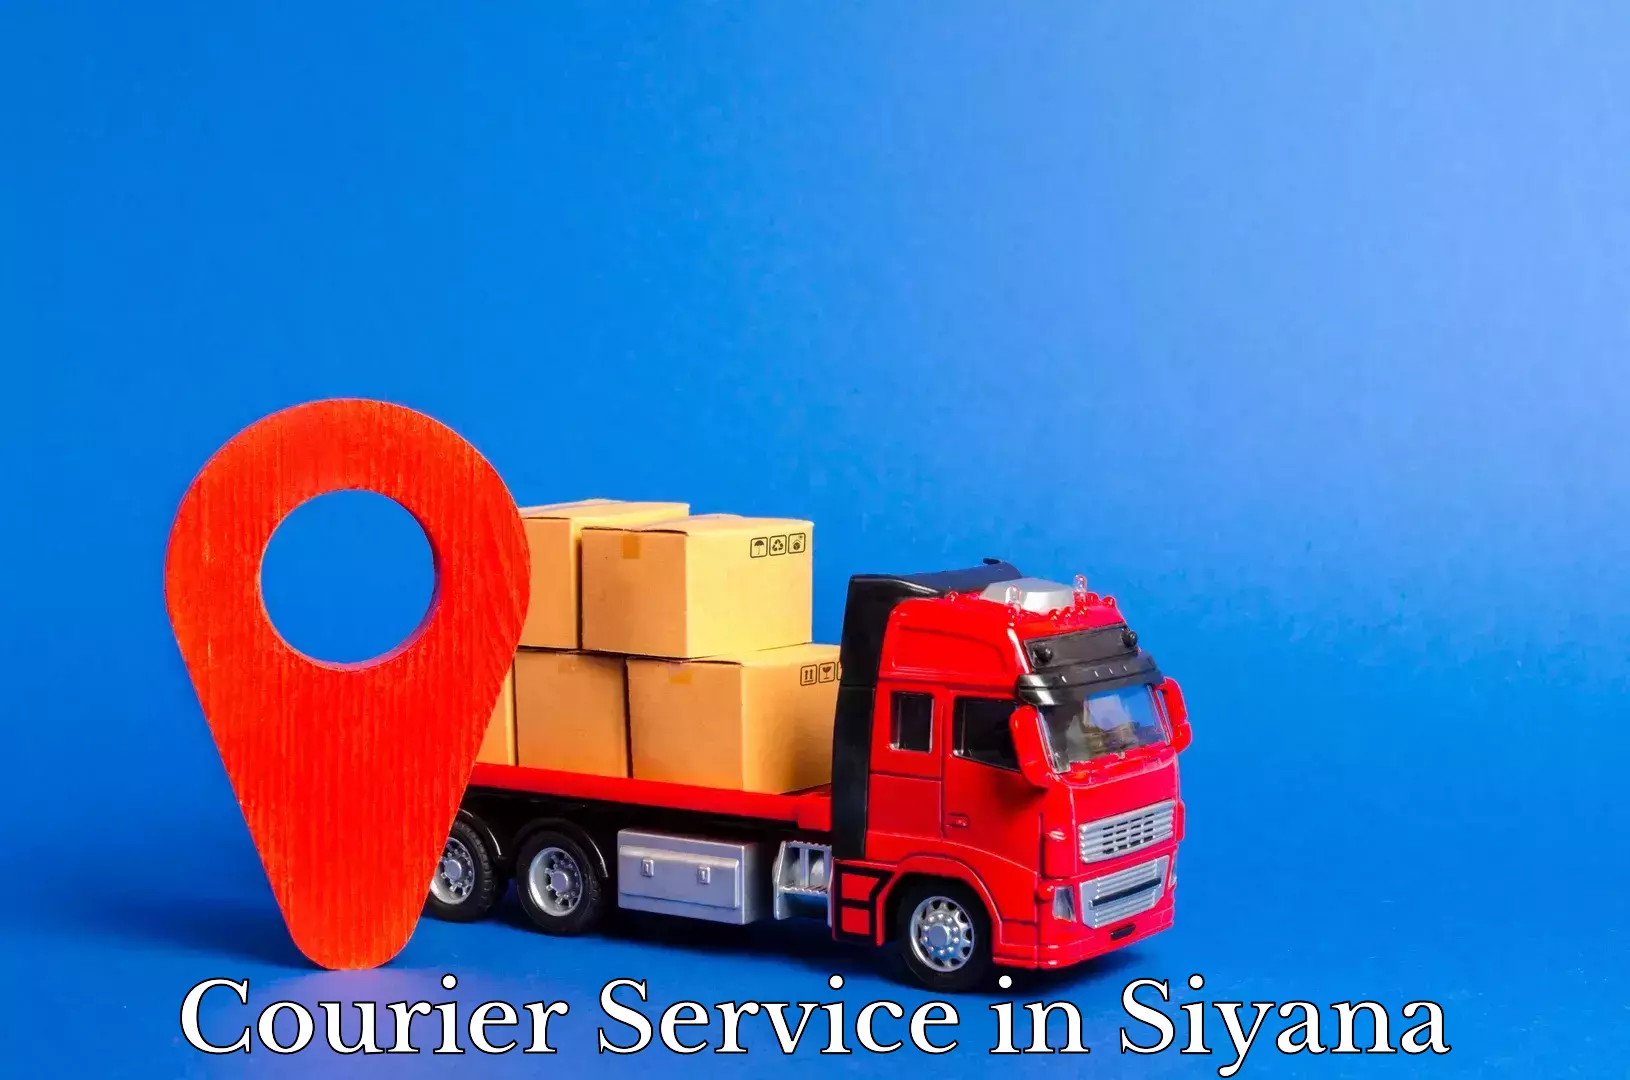 Customer-oriented courier services in Siyana